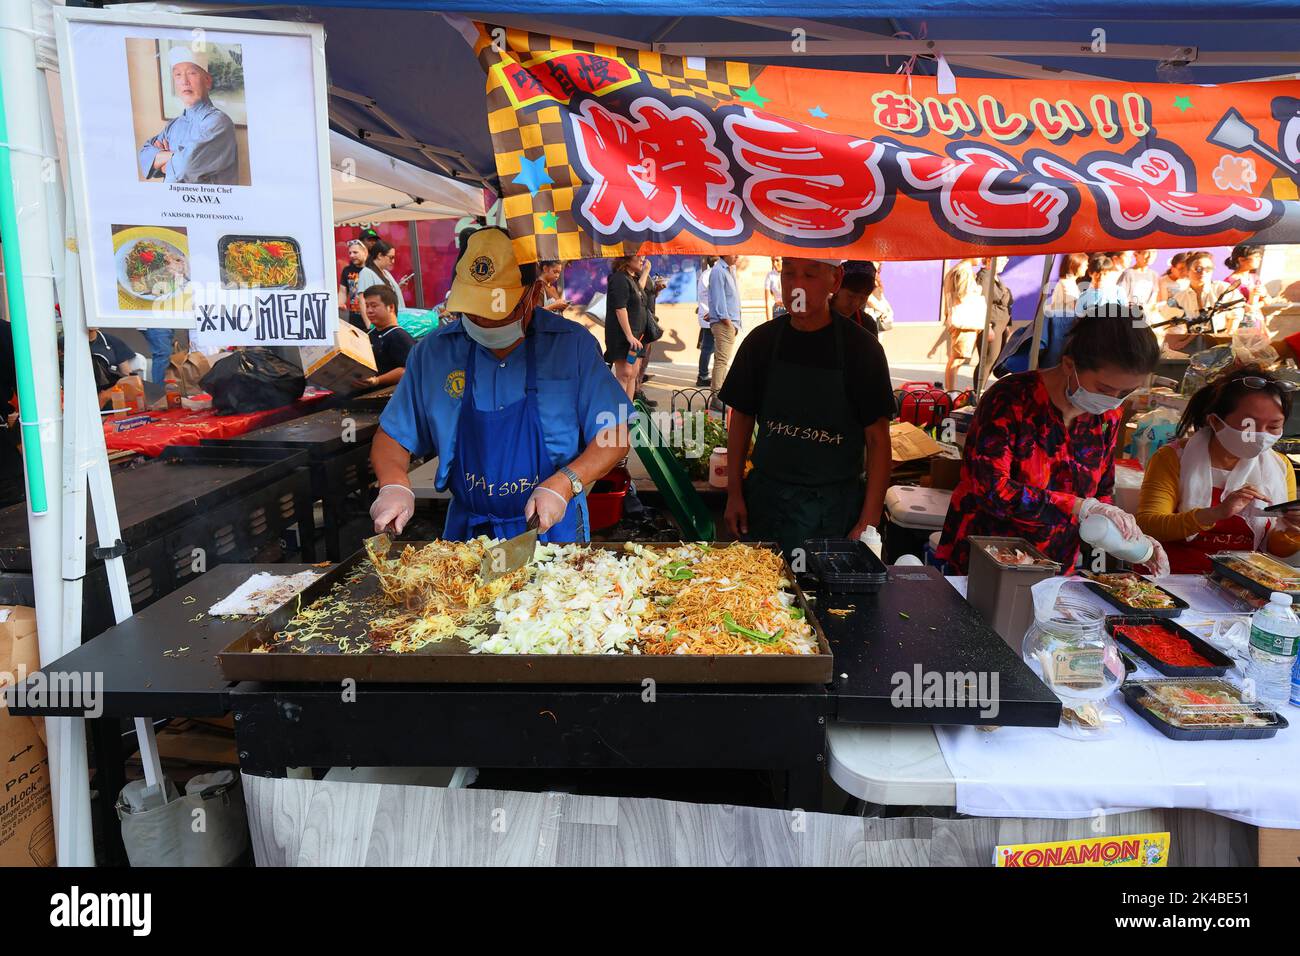 A chef prepares a meatless yakisoba 焼きそば stir fry noodles on a flat top grill at a Japan Fes street fair in Manhattan, New York. Stock Photo